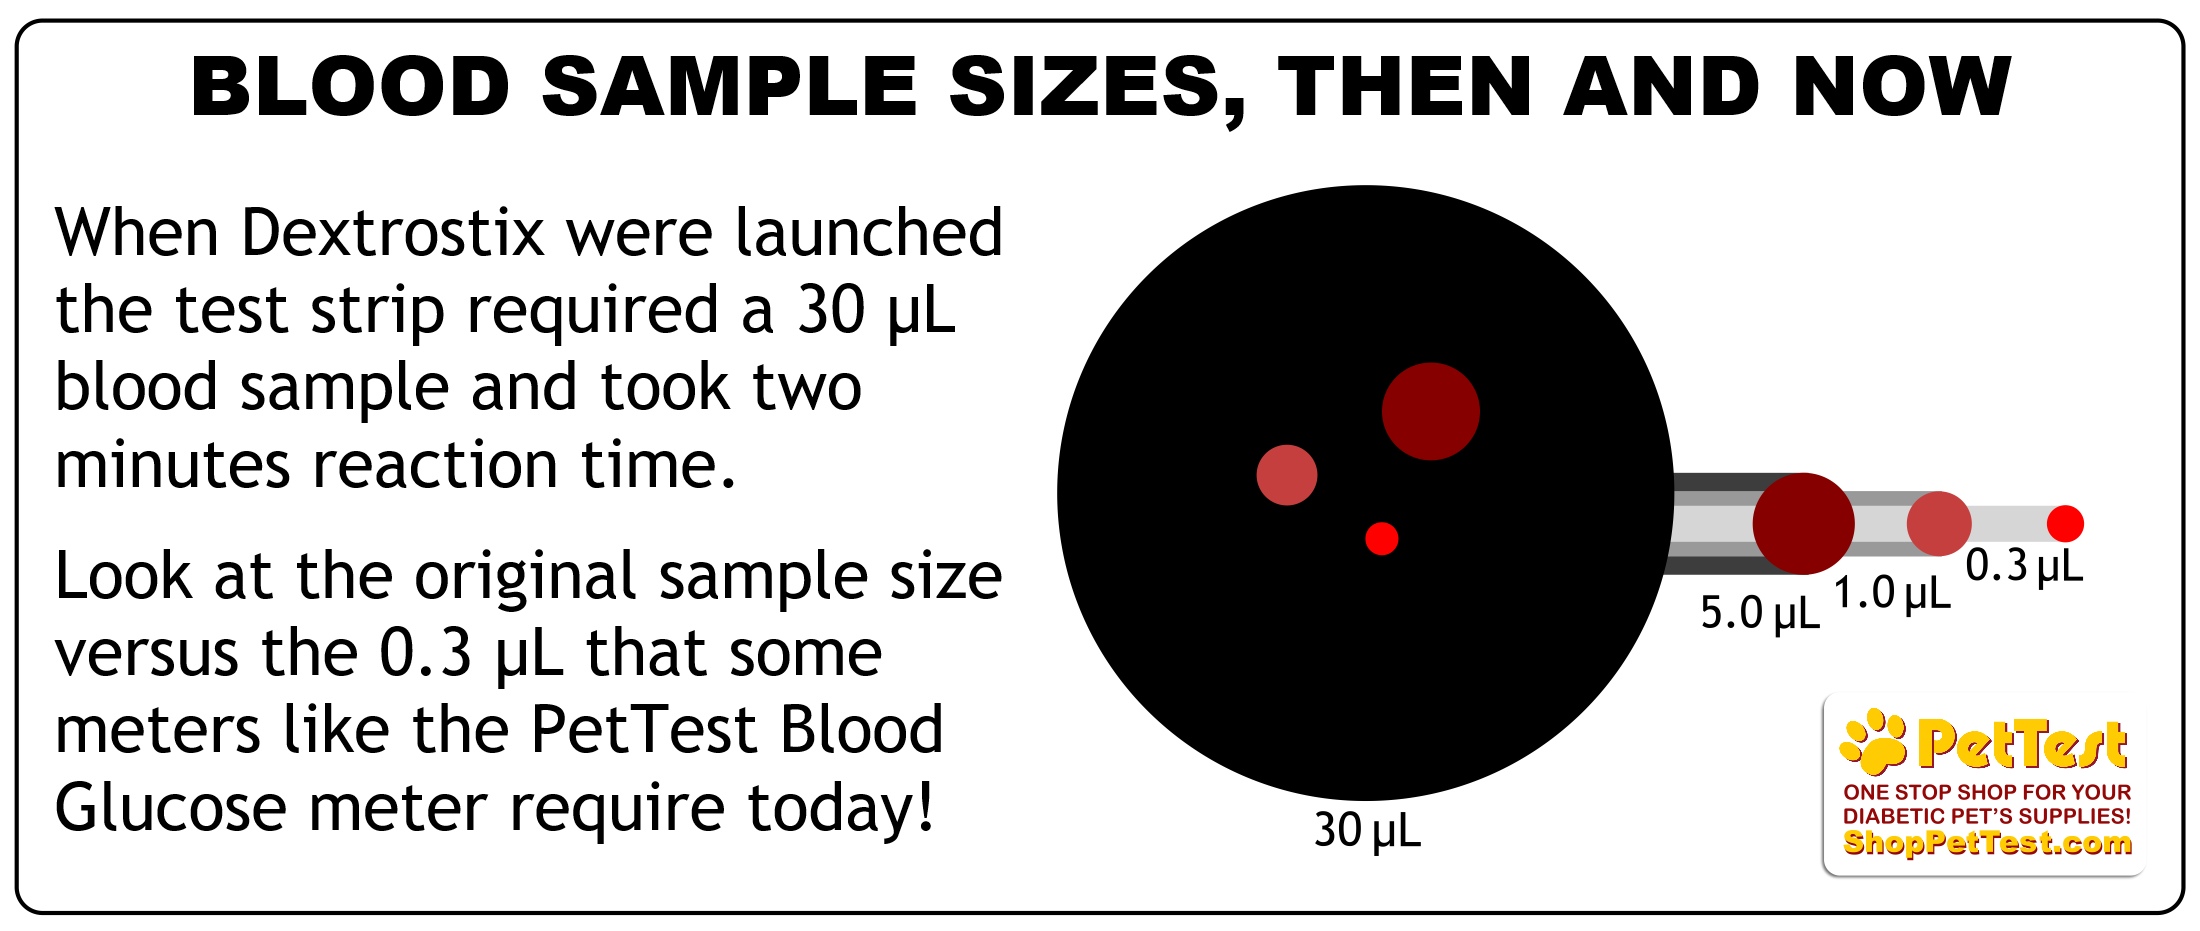 Blood Sample Sizes then and now for PT mtm